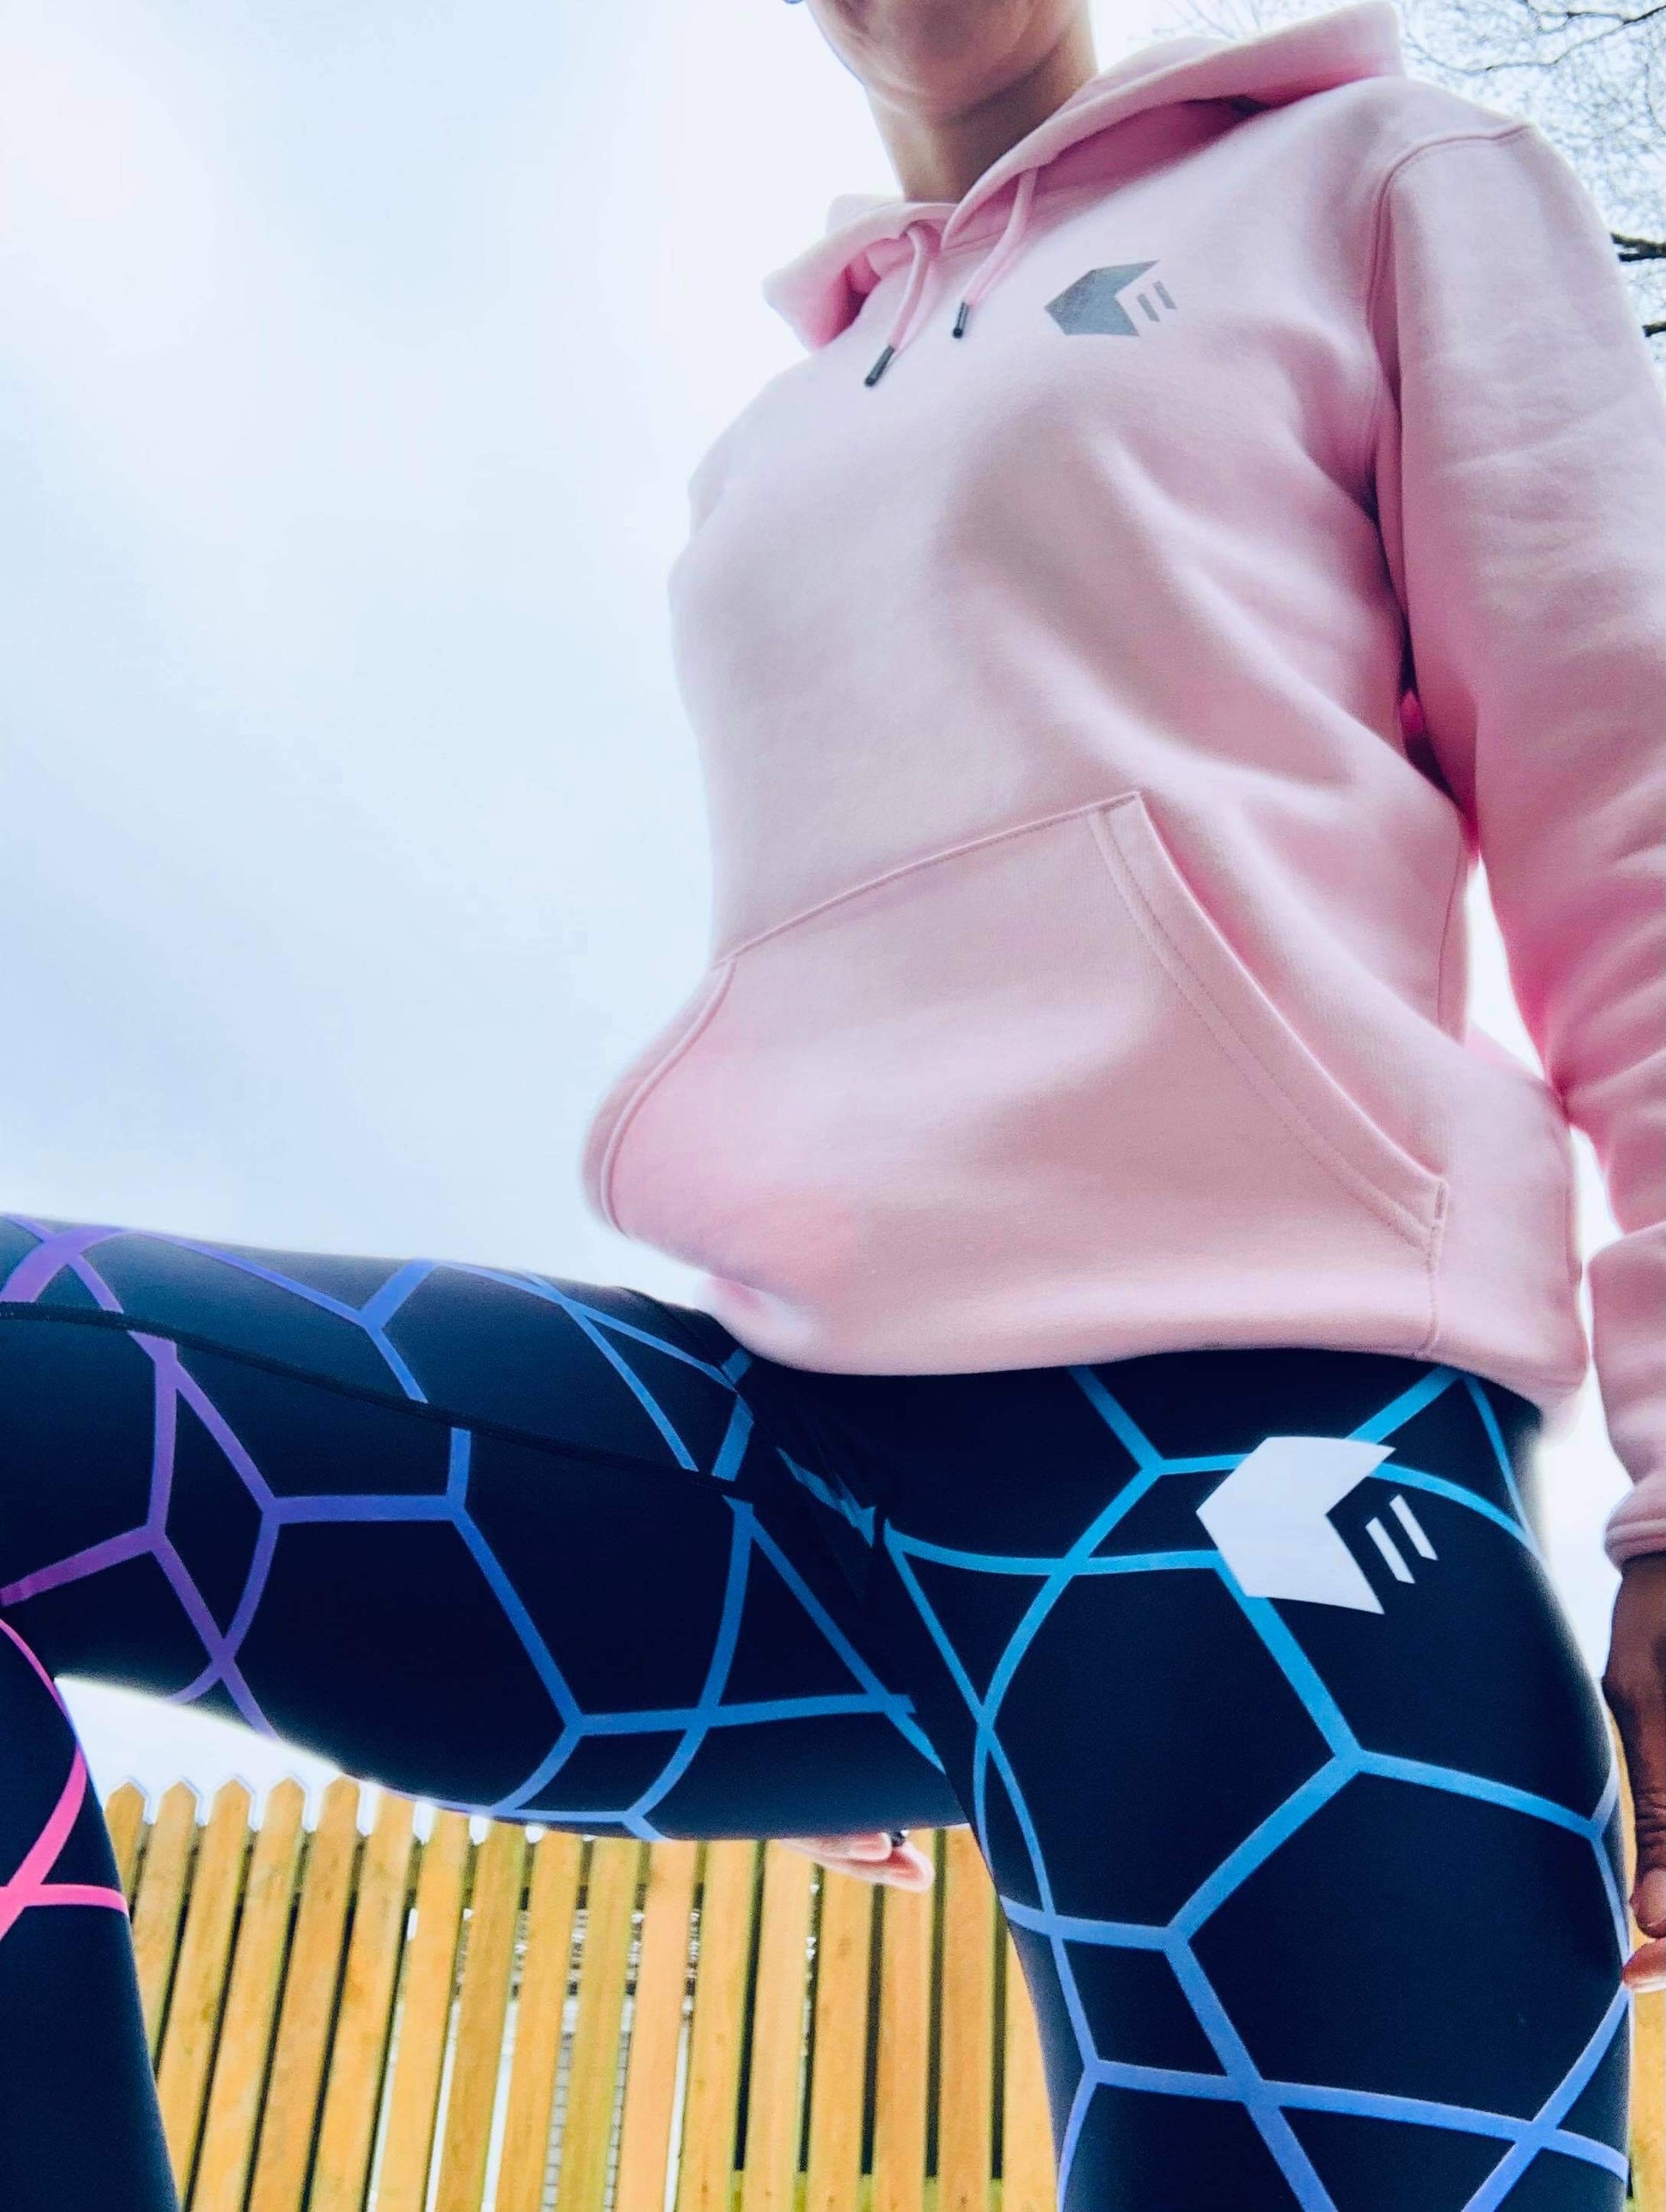 Outdoors with Strengthwork Leggings on and pink Element Karbon hoodie